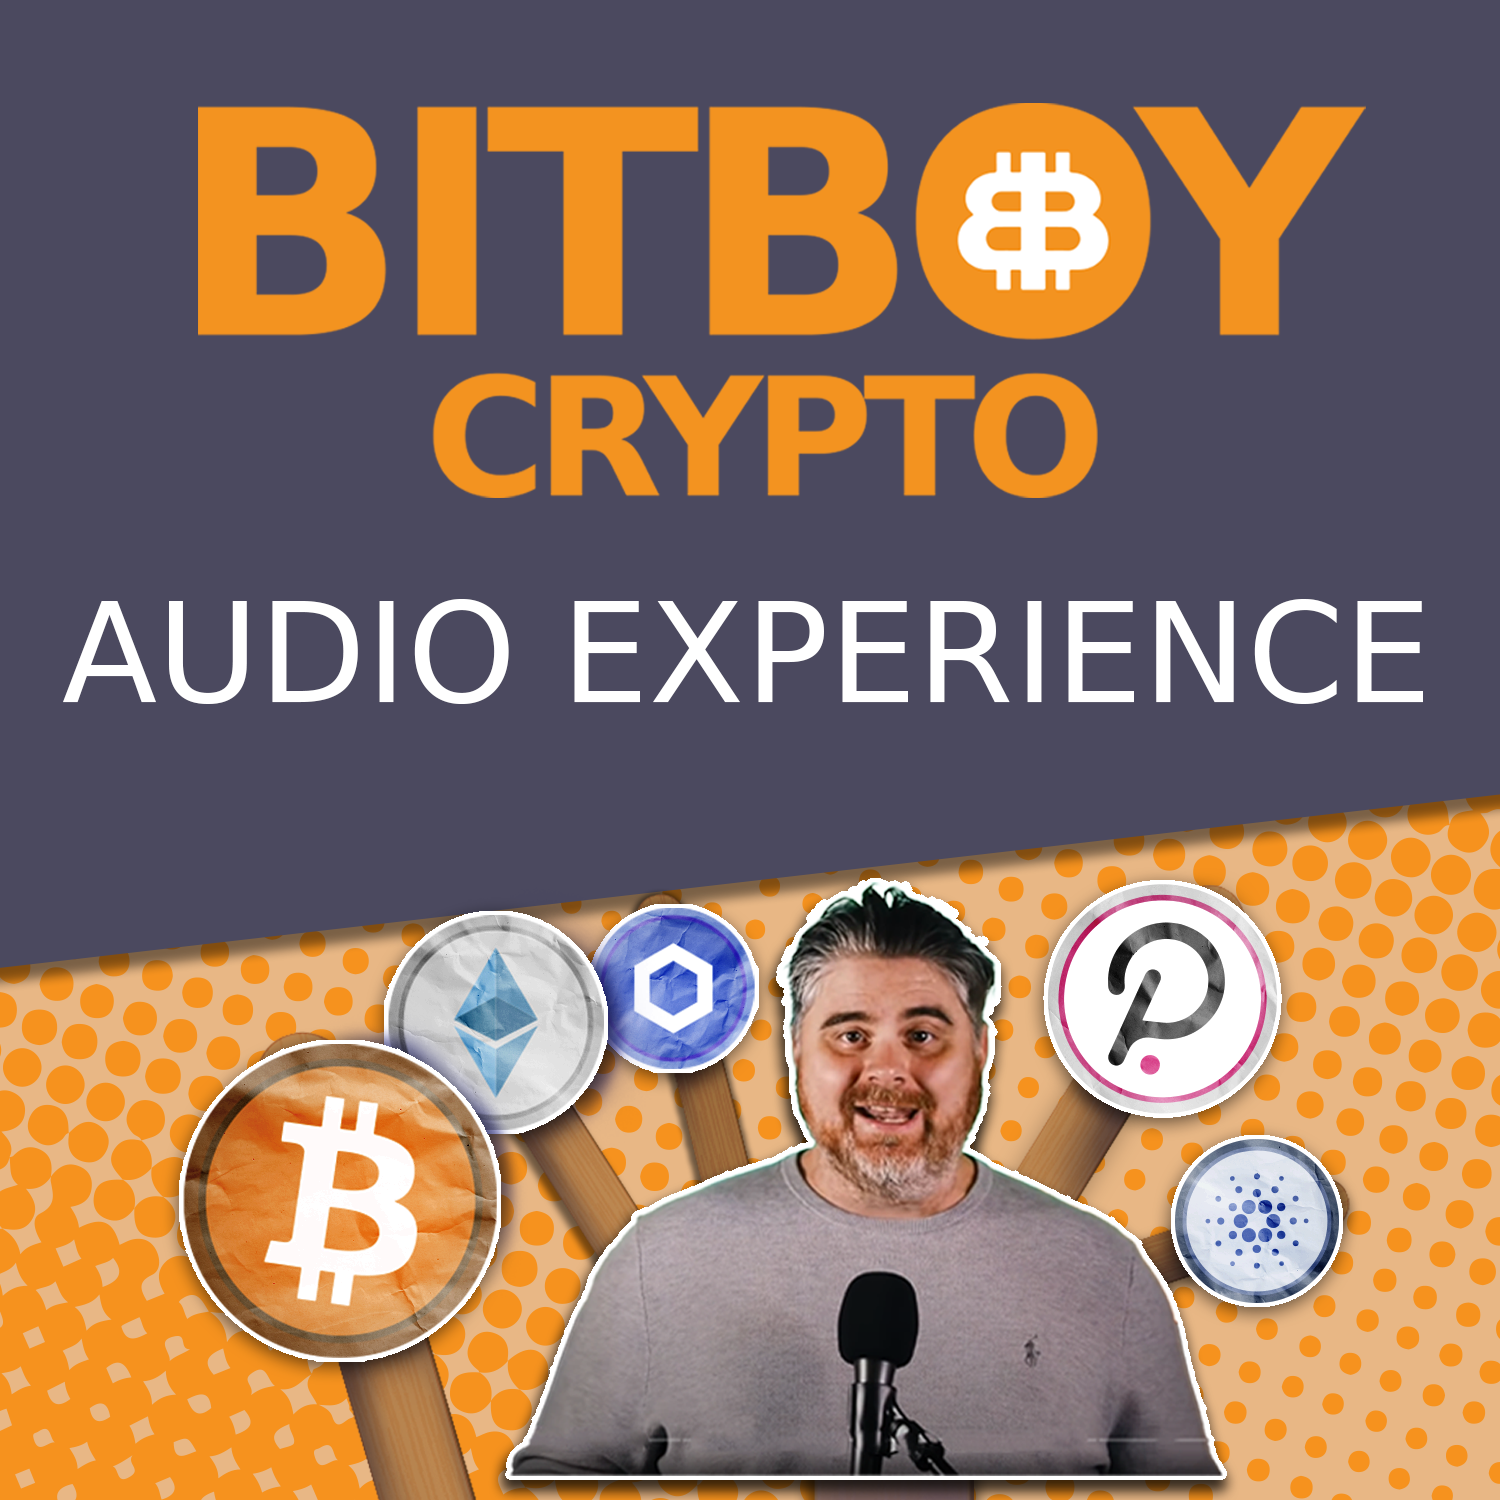 Fresh update on "millions" discussed on The Bitboy Crypto Podcast